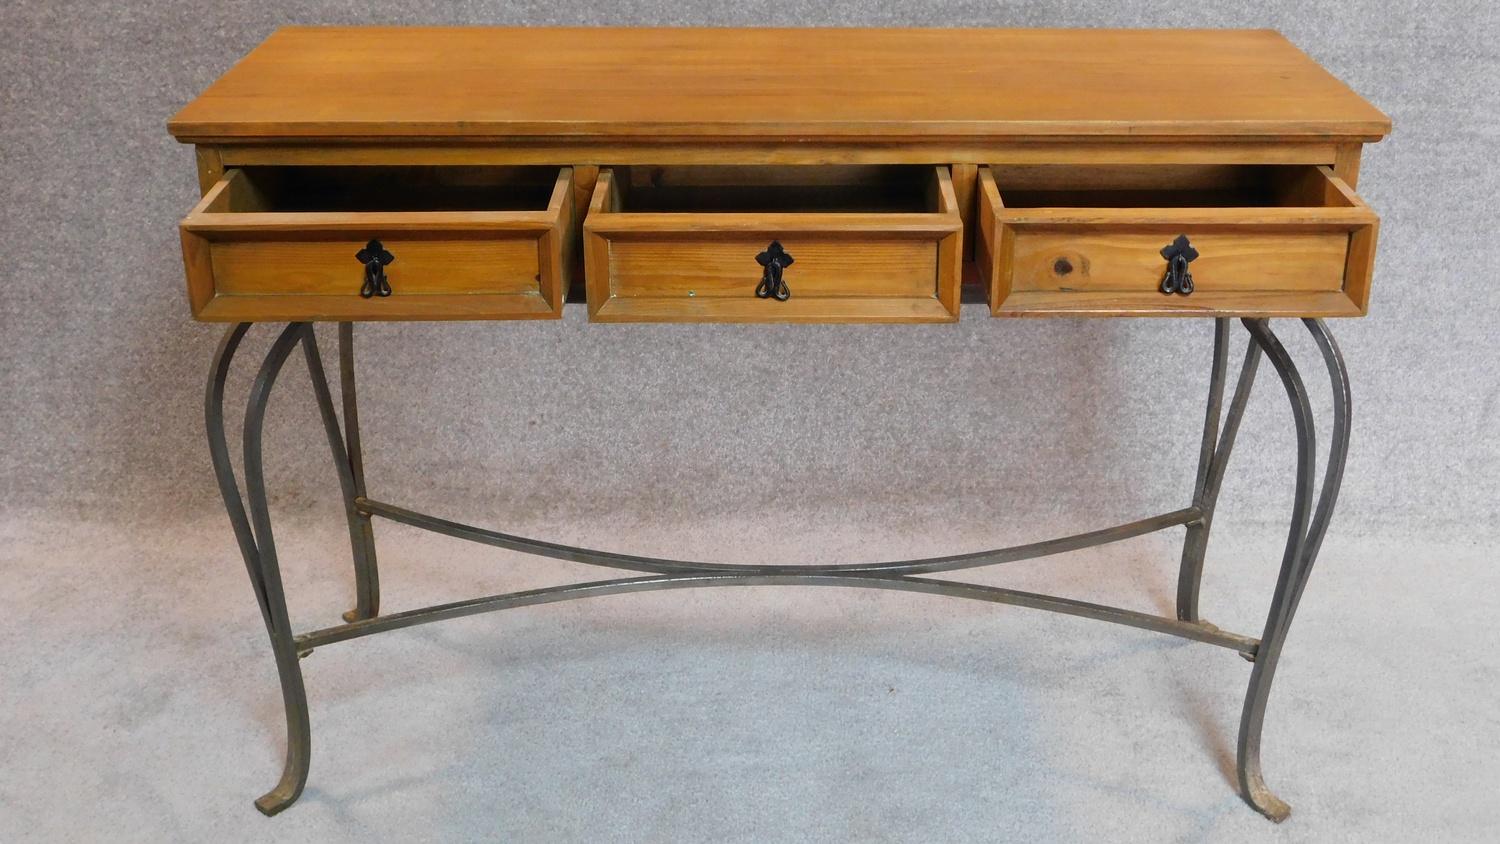 20th Century pitch pine console table with three drawers on cabriole wrought iron legs. - Image 2 of 4